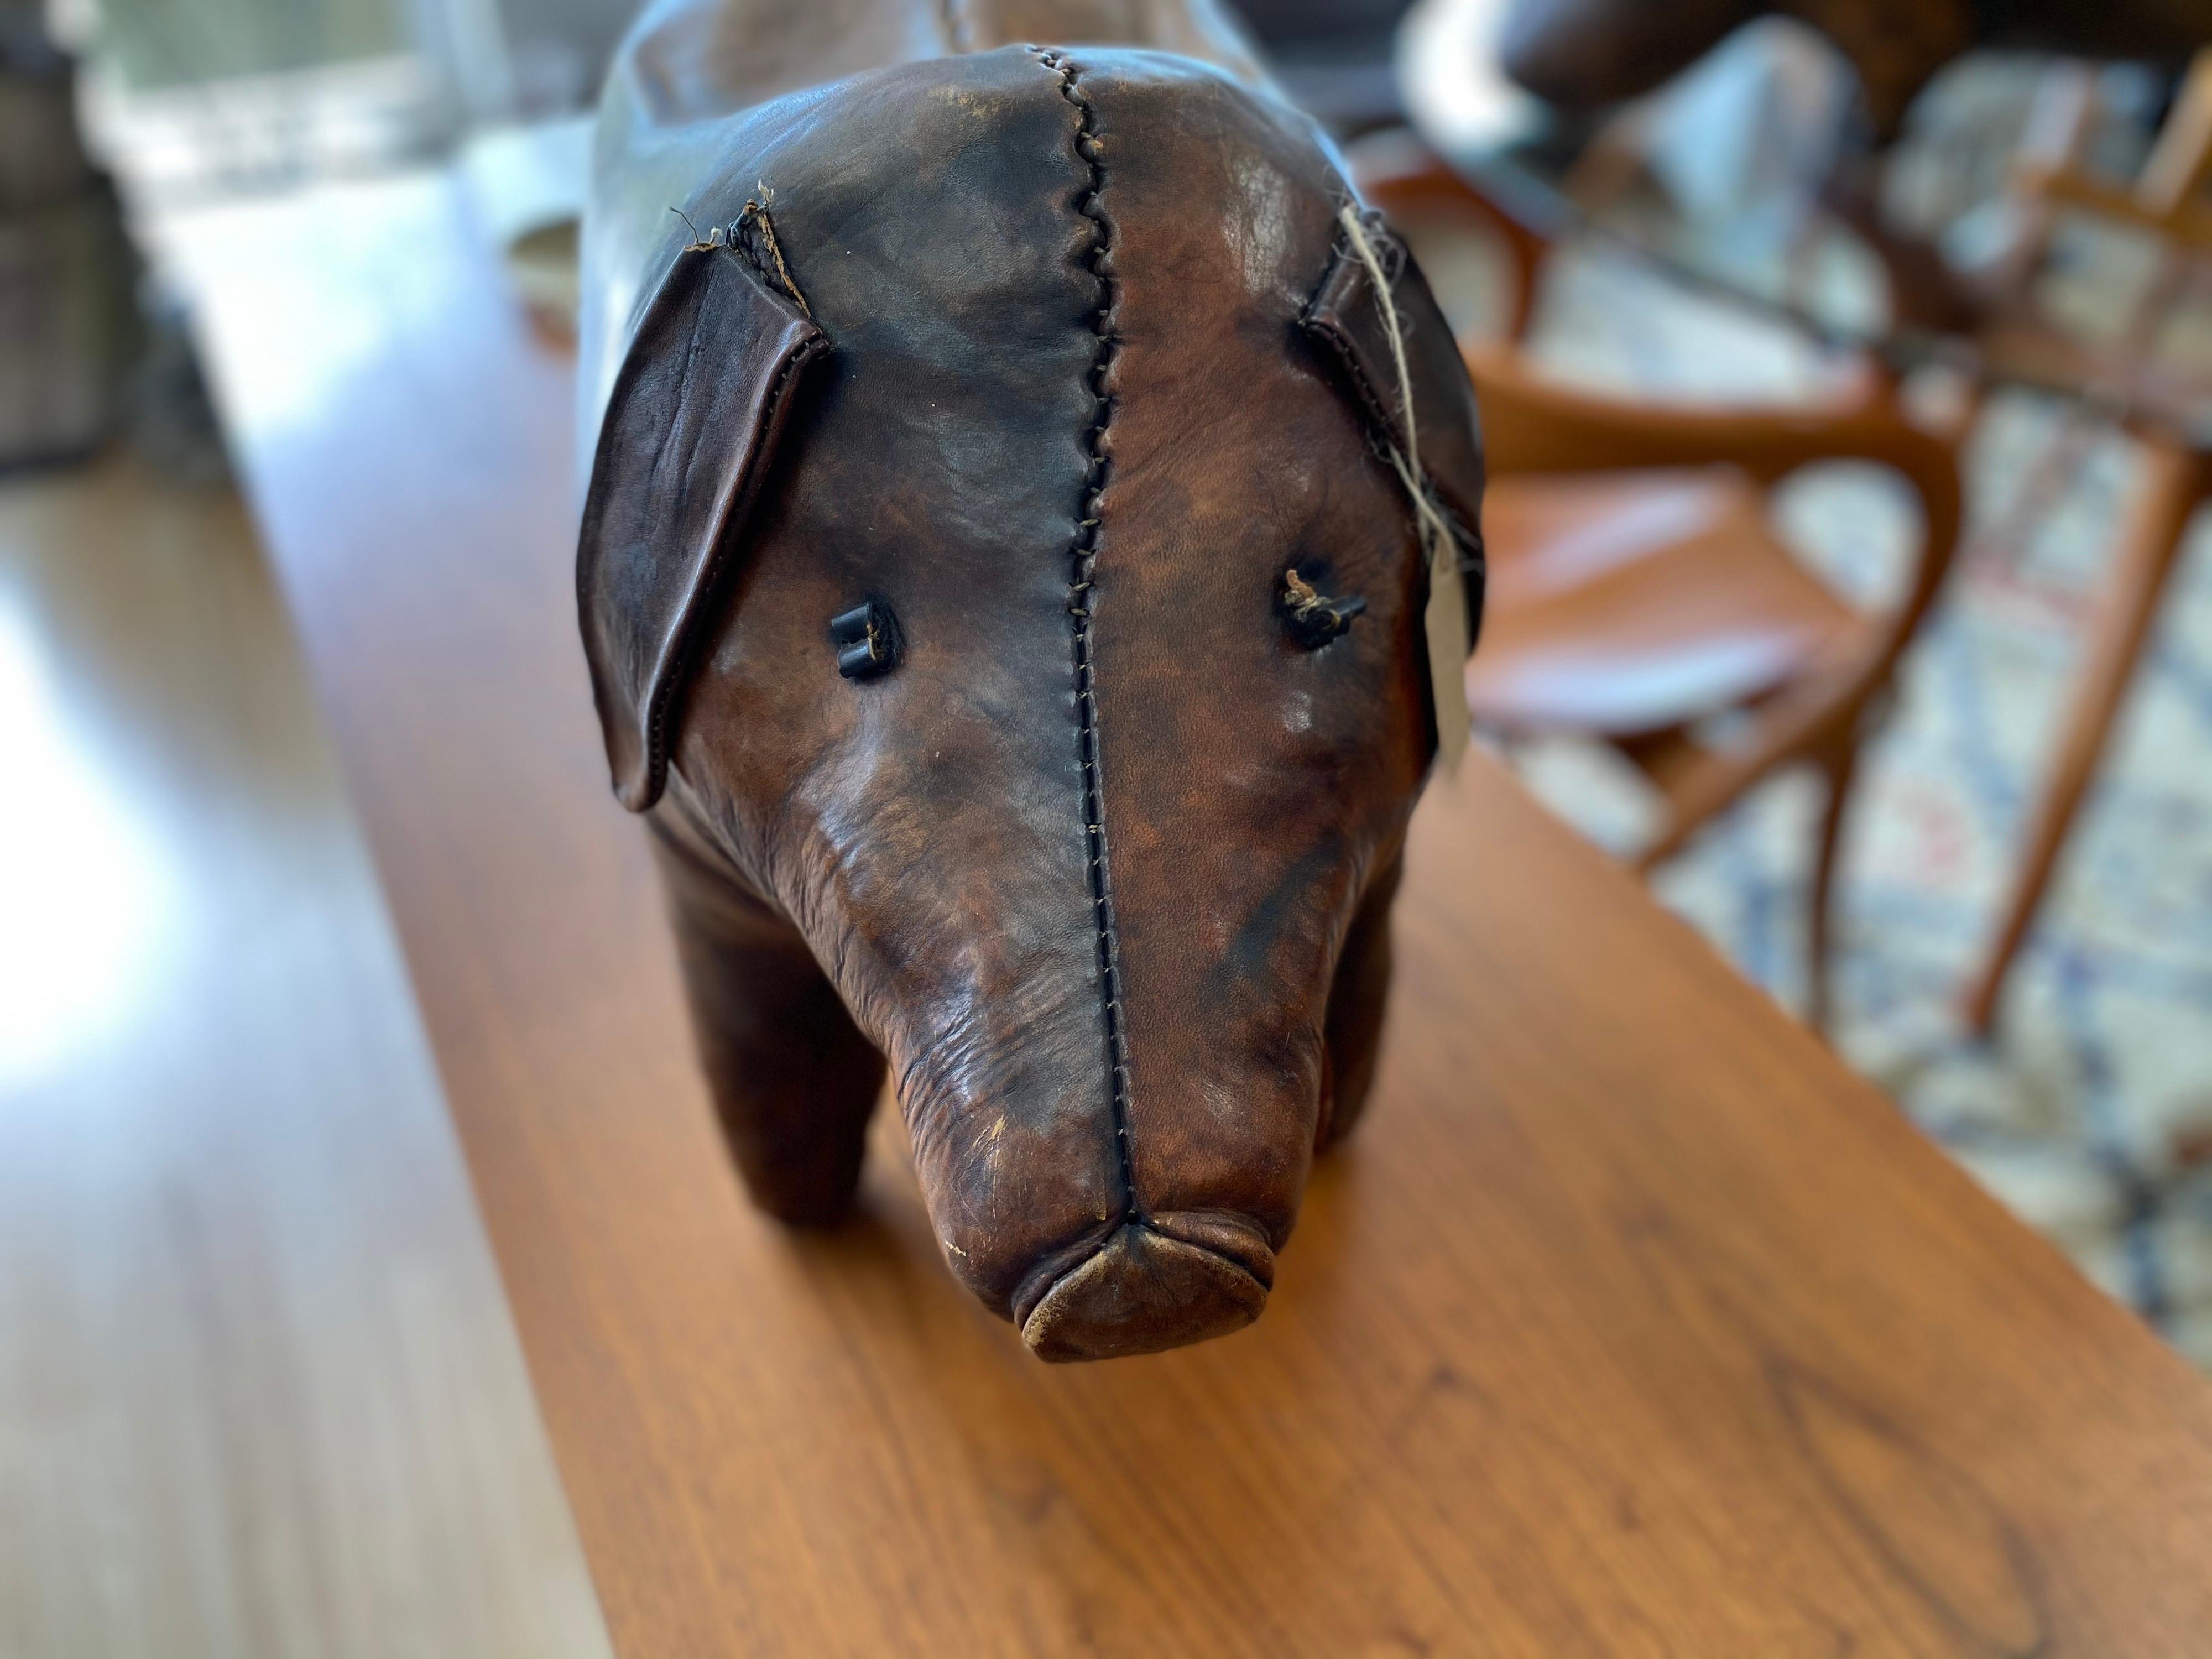 Vintage leather pig decorative footstool designed by Dimitri Omersa for Abercrombie and Fitch, circa 1960s is hand-stitched and features aged leather. The tail and eyes are intact. The back is bent due to use, but footstool is overall structurally